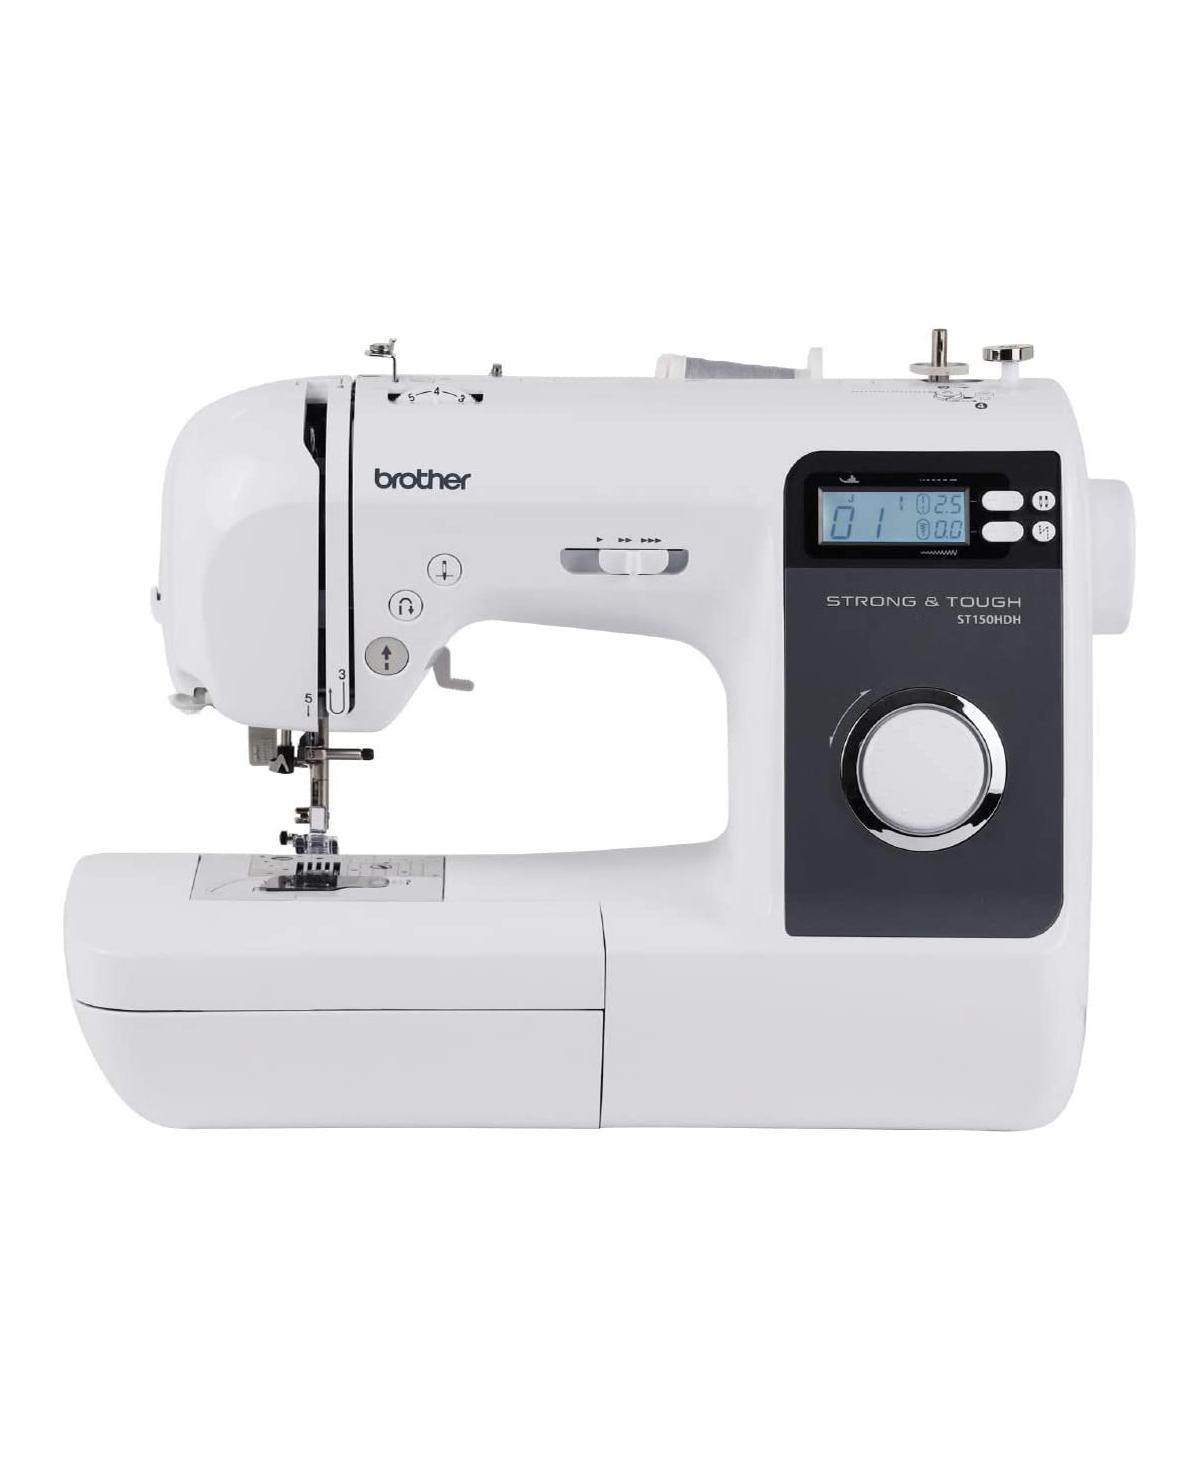 ST150HDH Strong & Tough Heavy Duty Computerized Sewing Machine - White